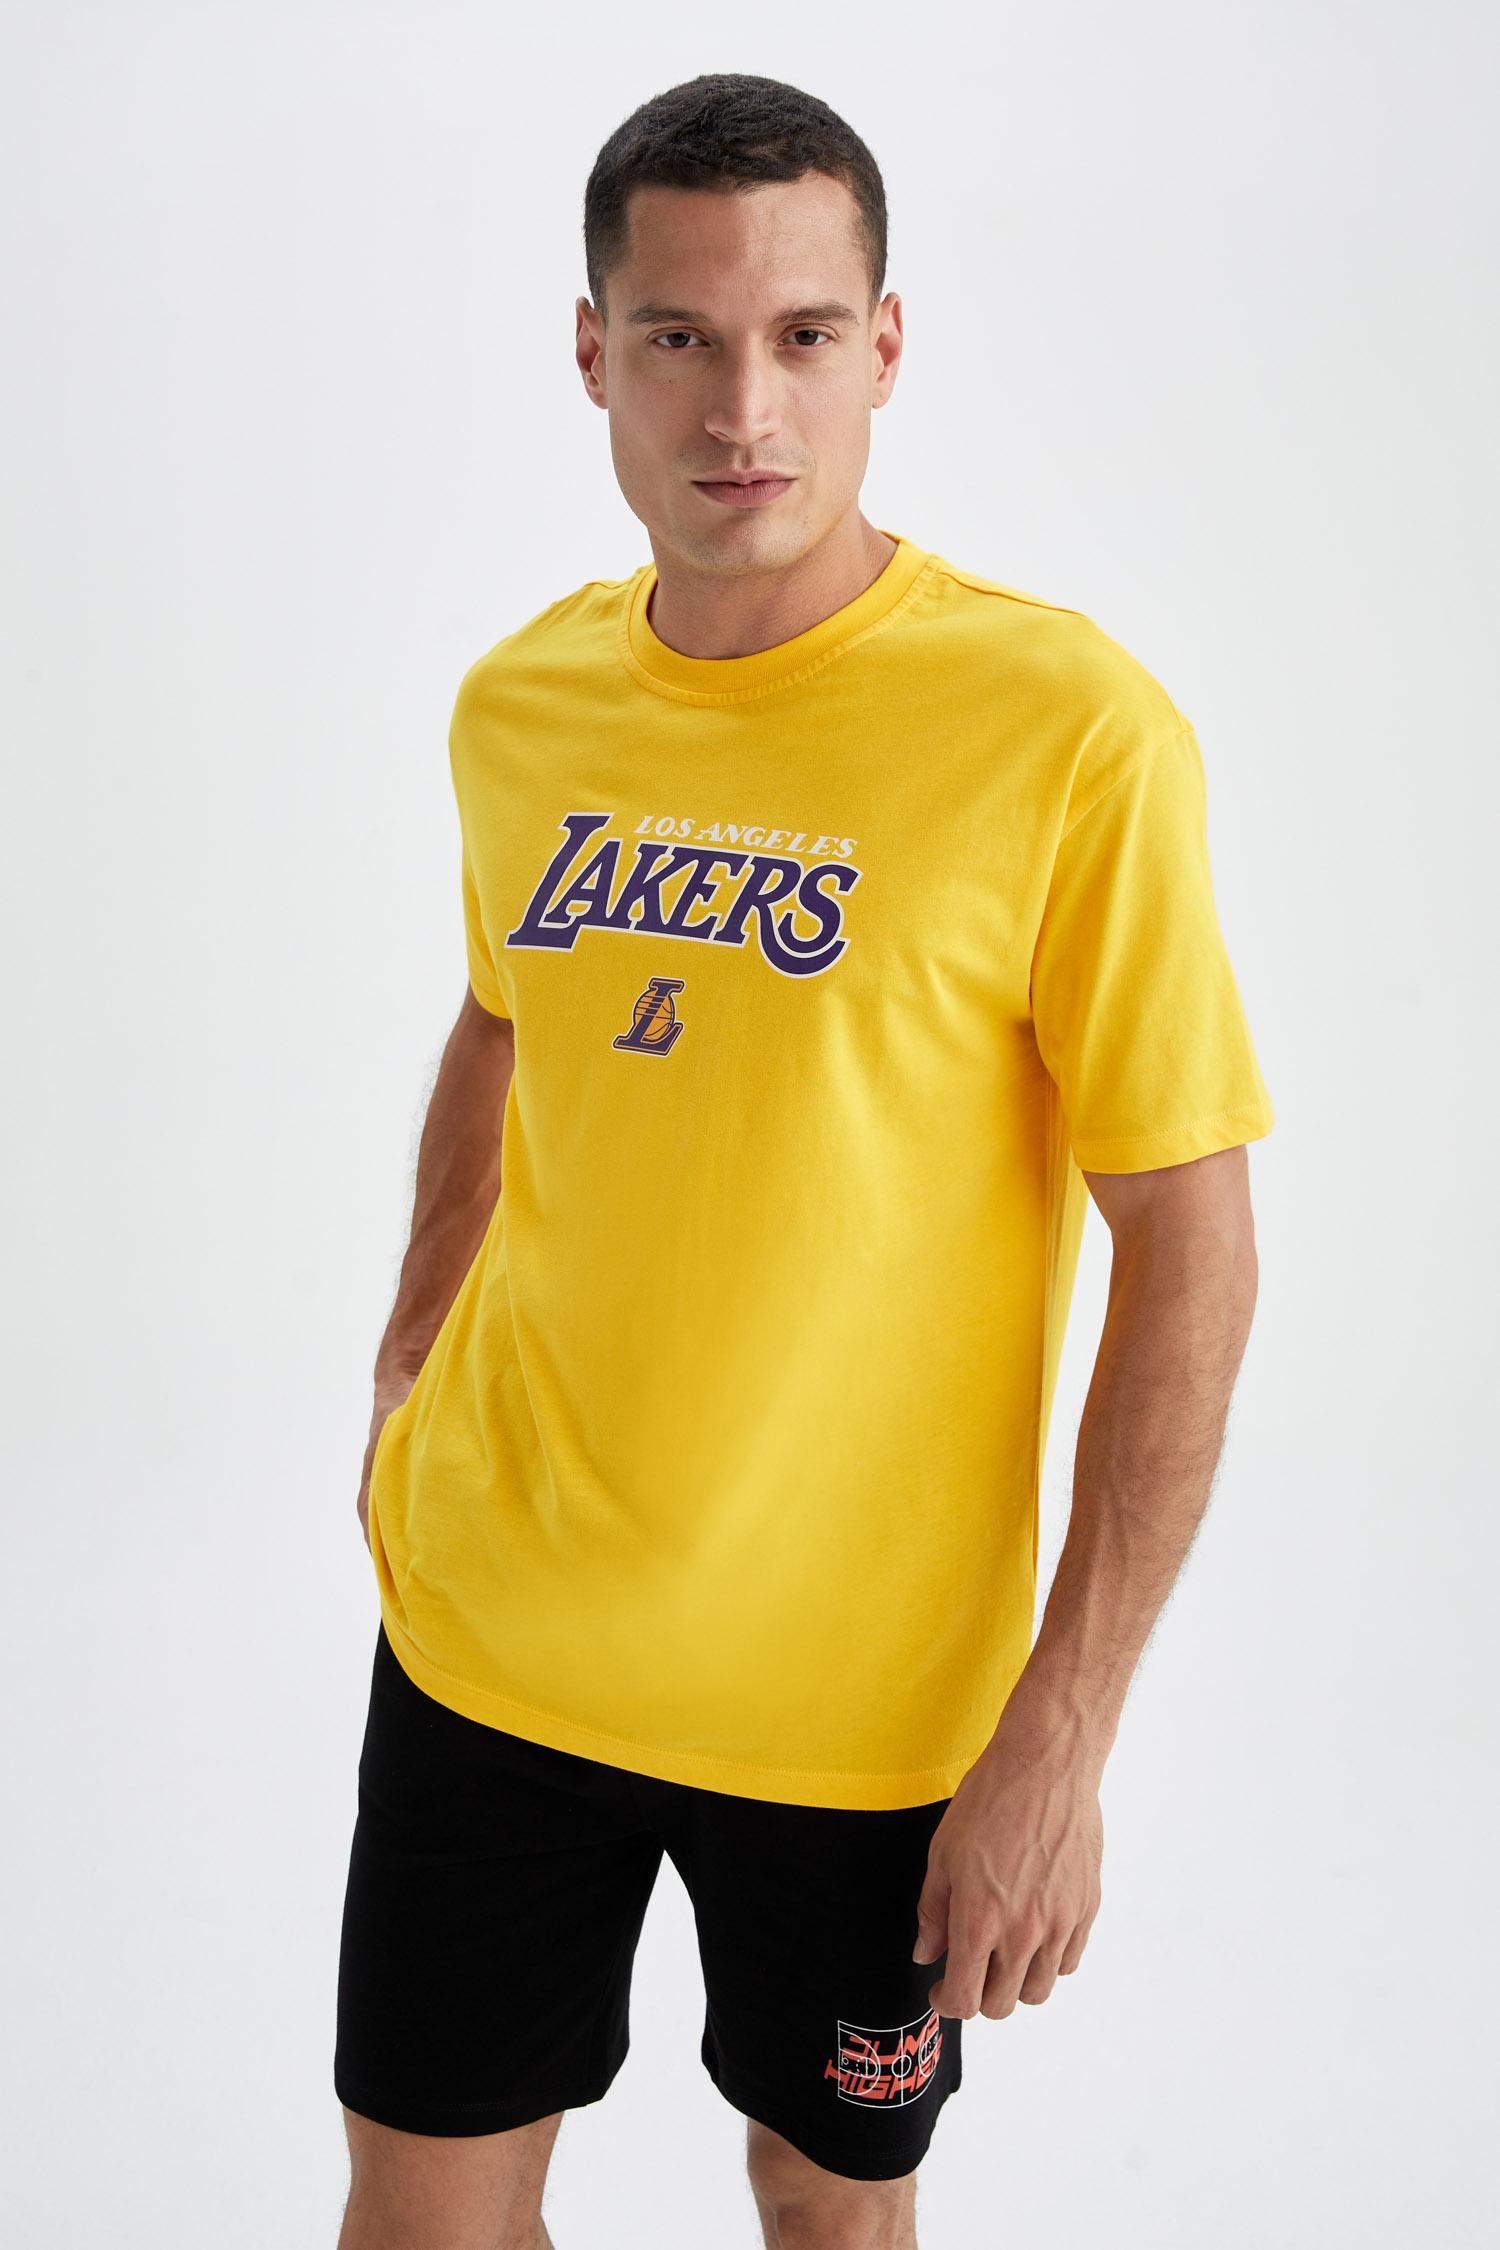 Purple MAN Defacto Fit NBA Los Angeles Lakers Licensed Oversize Fit Crew  Neck Sleeveless T-Shirt 2514304